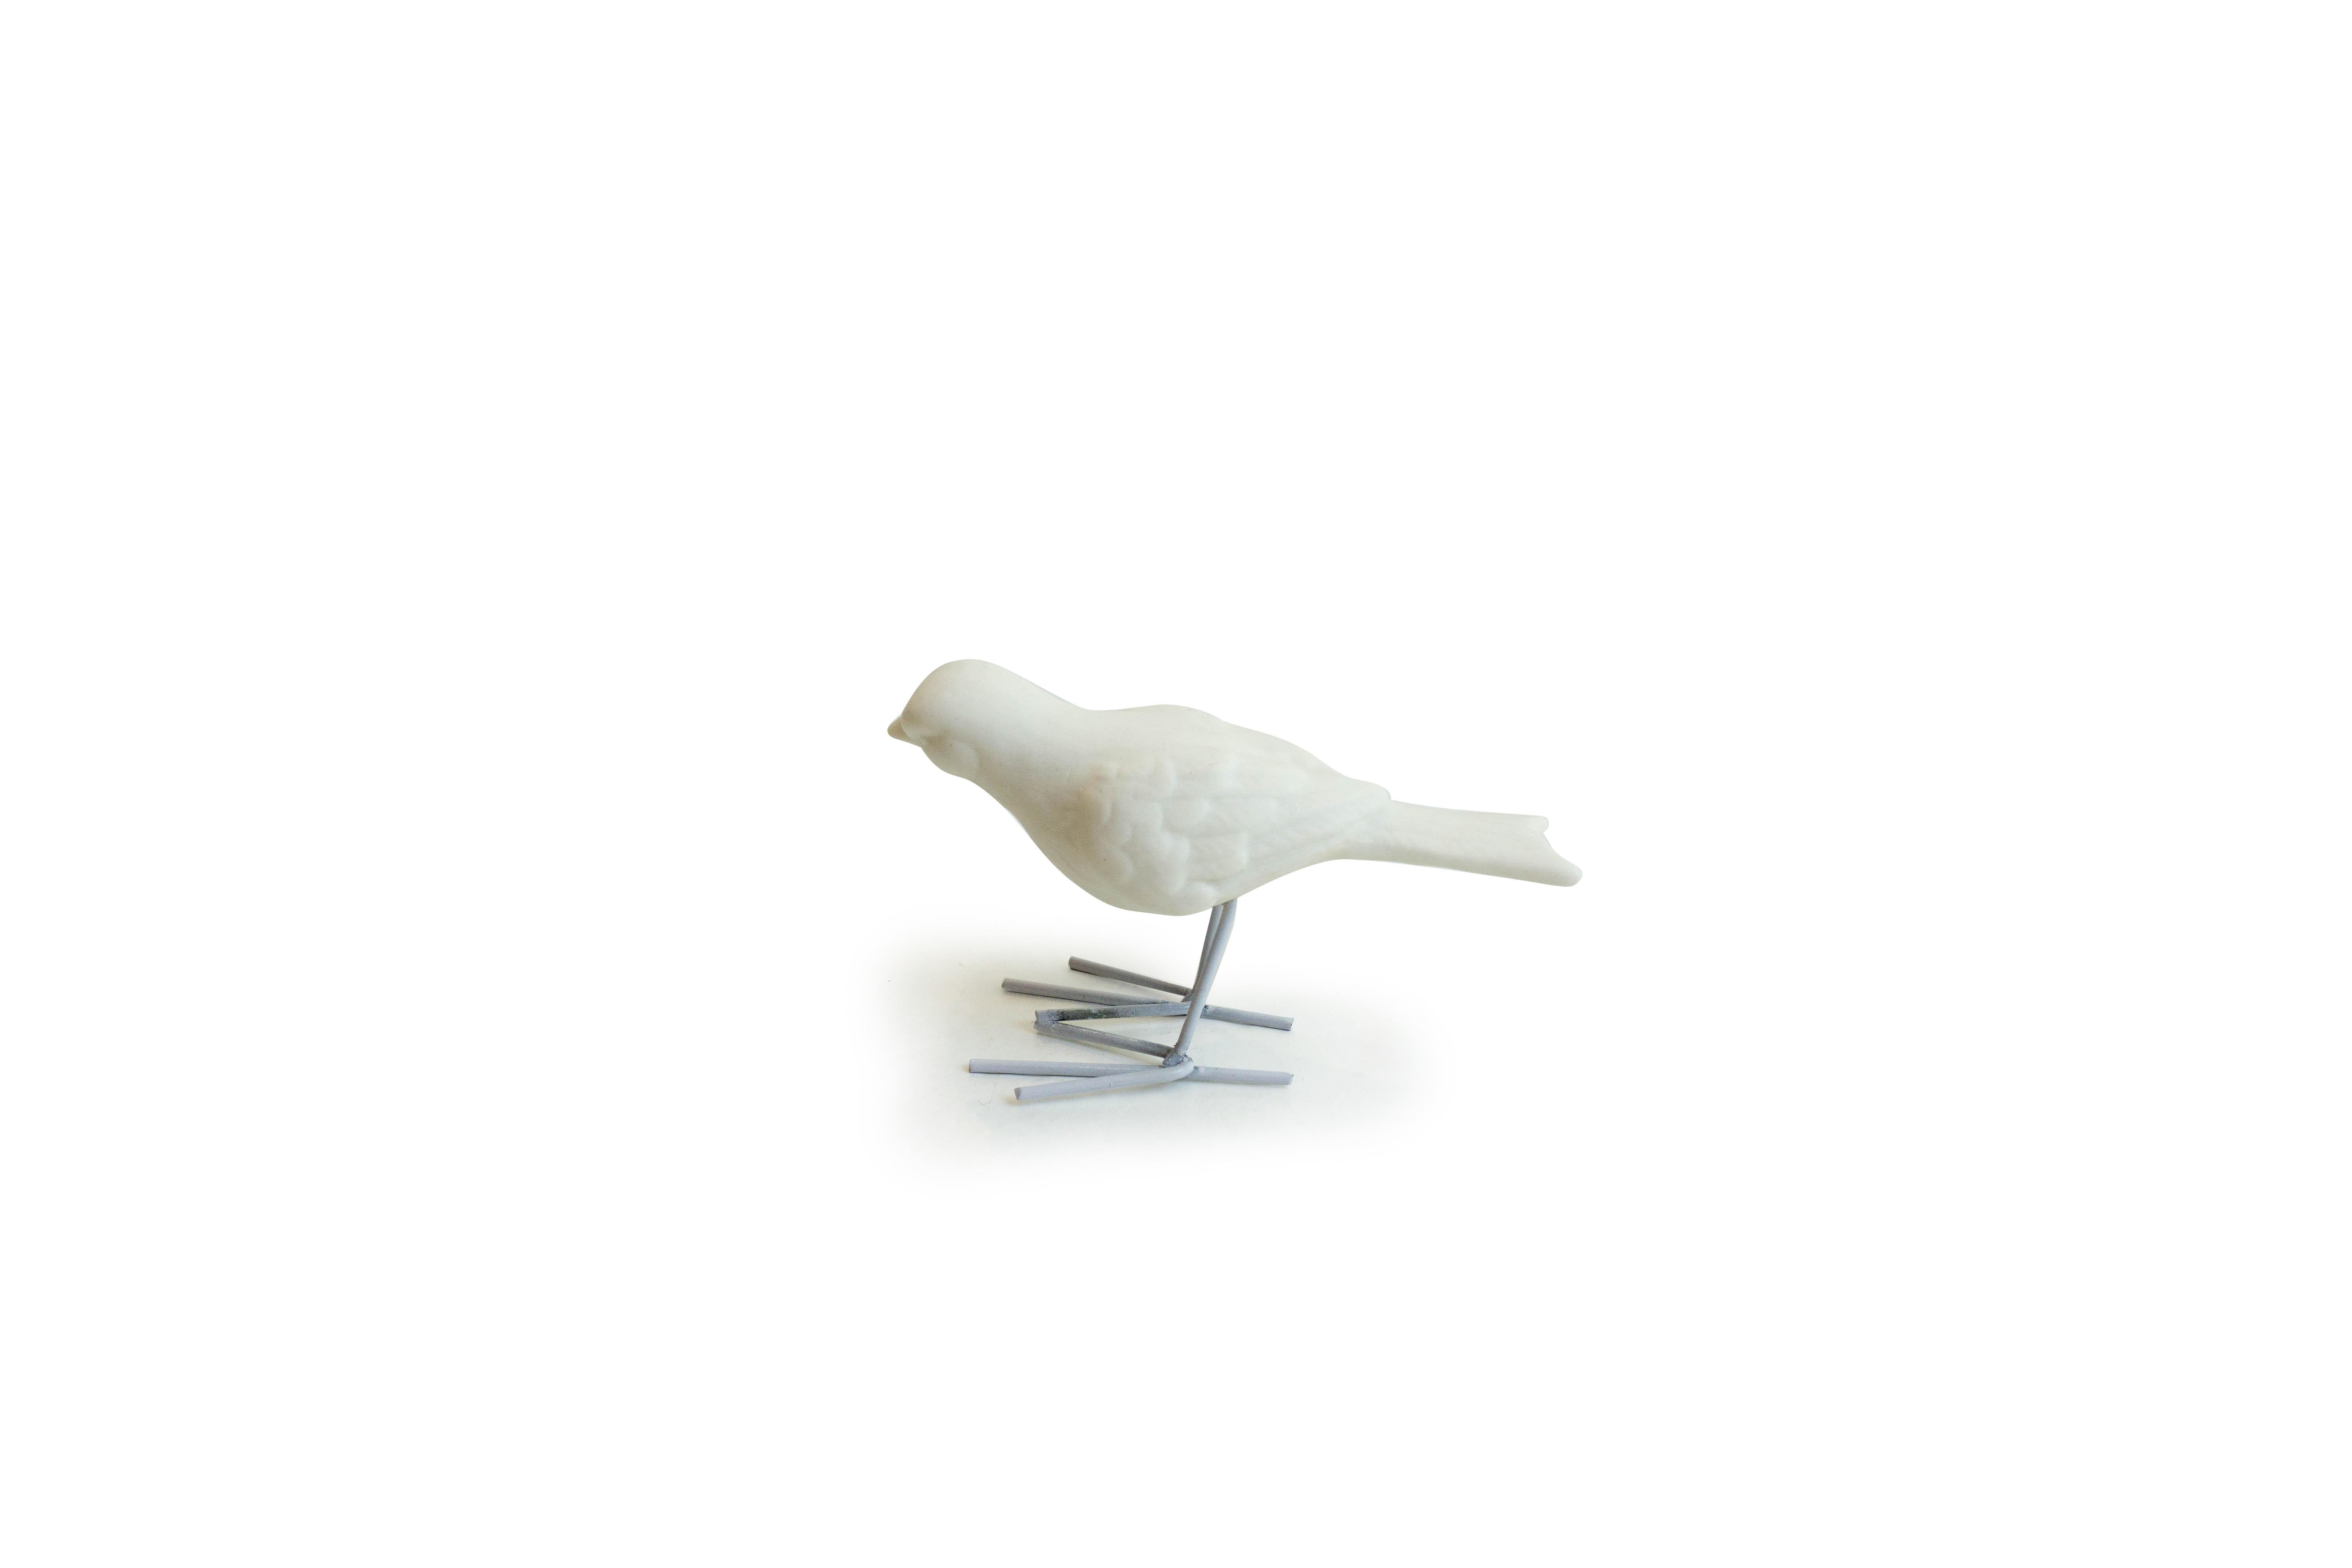 Set of 4 Unglazed White Porcelain Birds, Starlings supported by White Iron Legs  For Sale 2